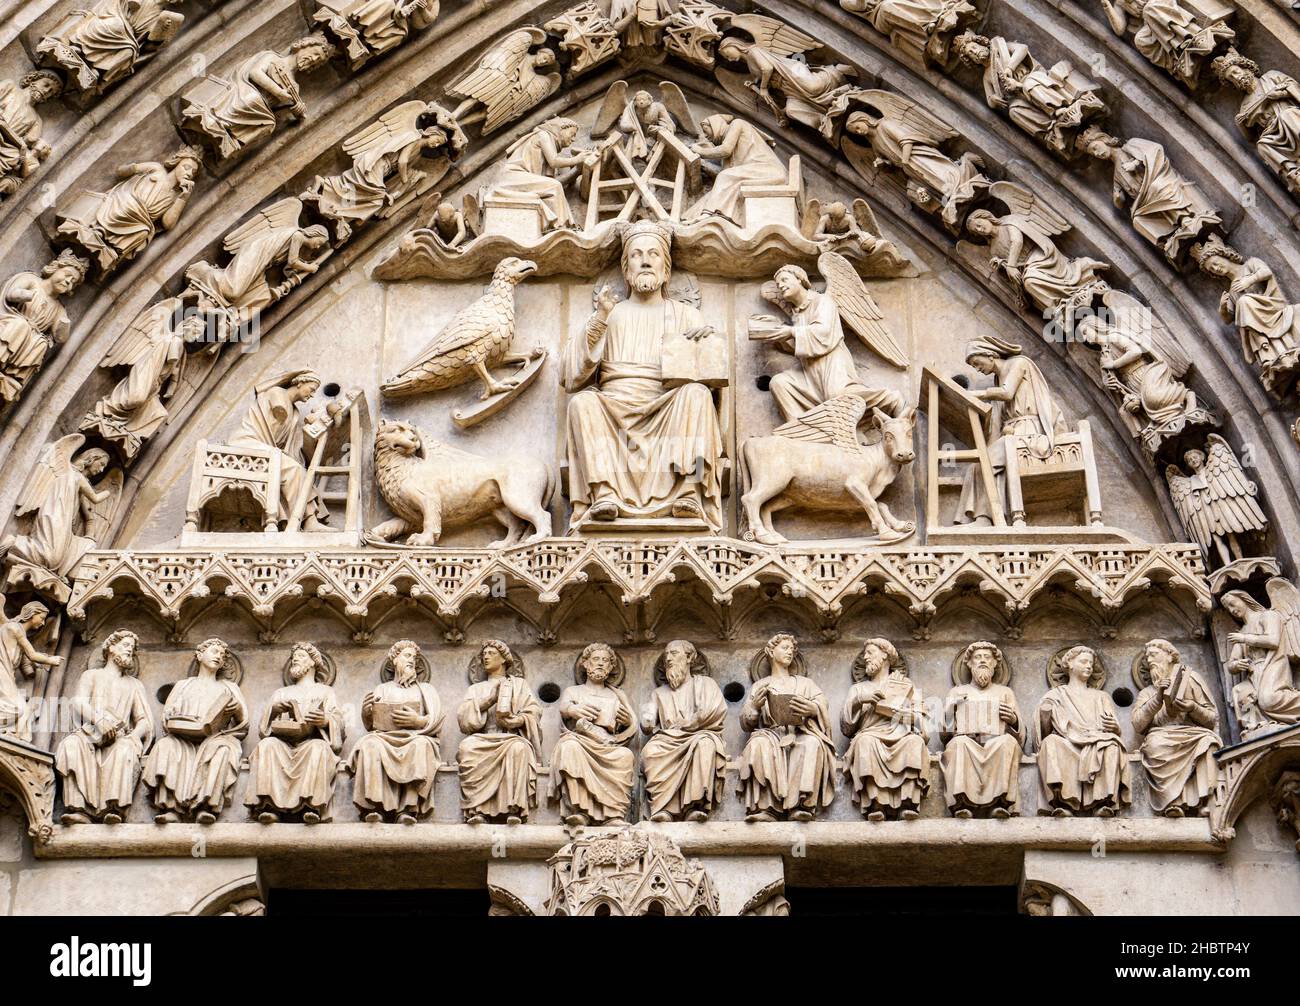 Christ majesty with the tetramorphs, pediment of Burgos Cathedrals, Sarmental Facade. Stock Photo